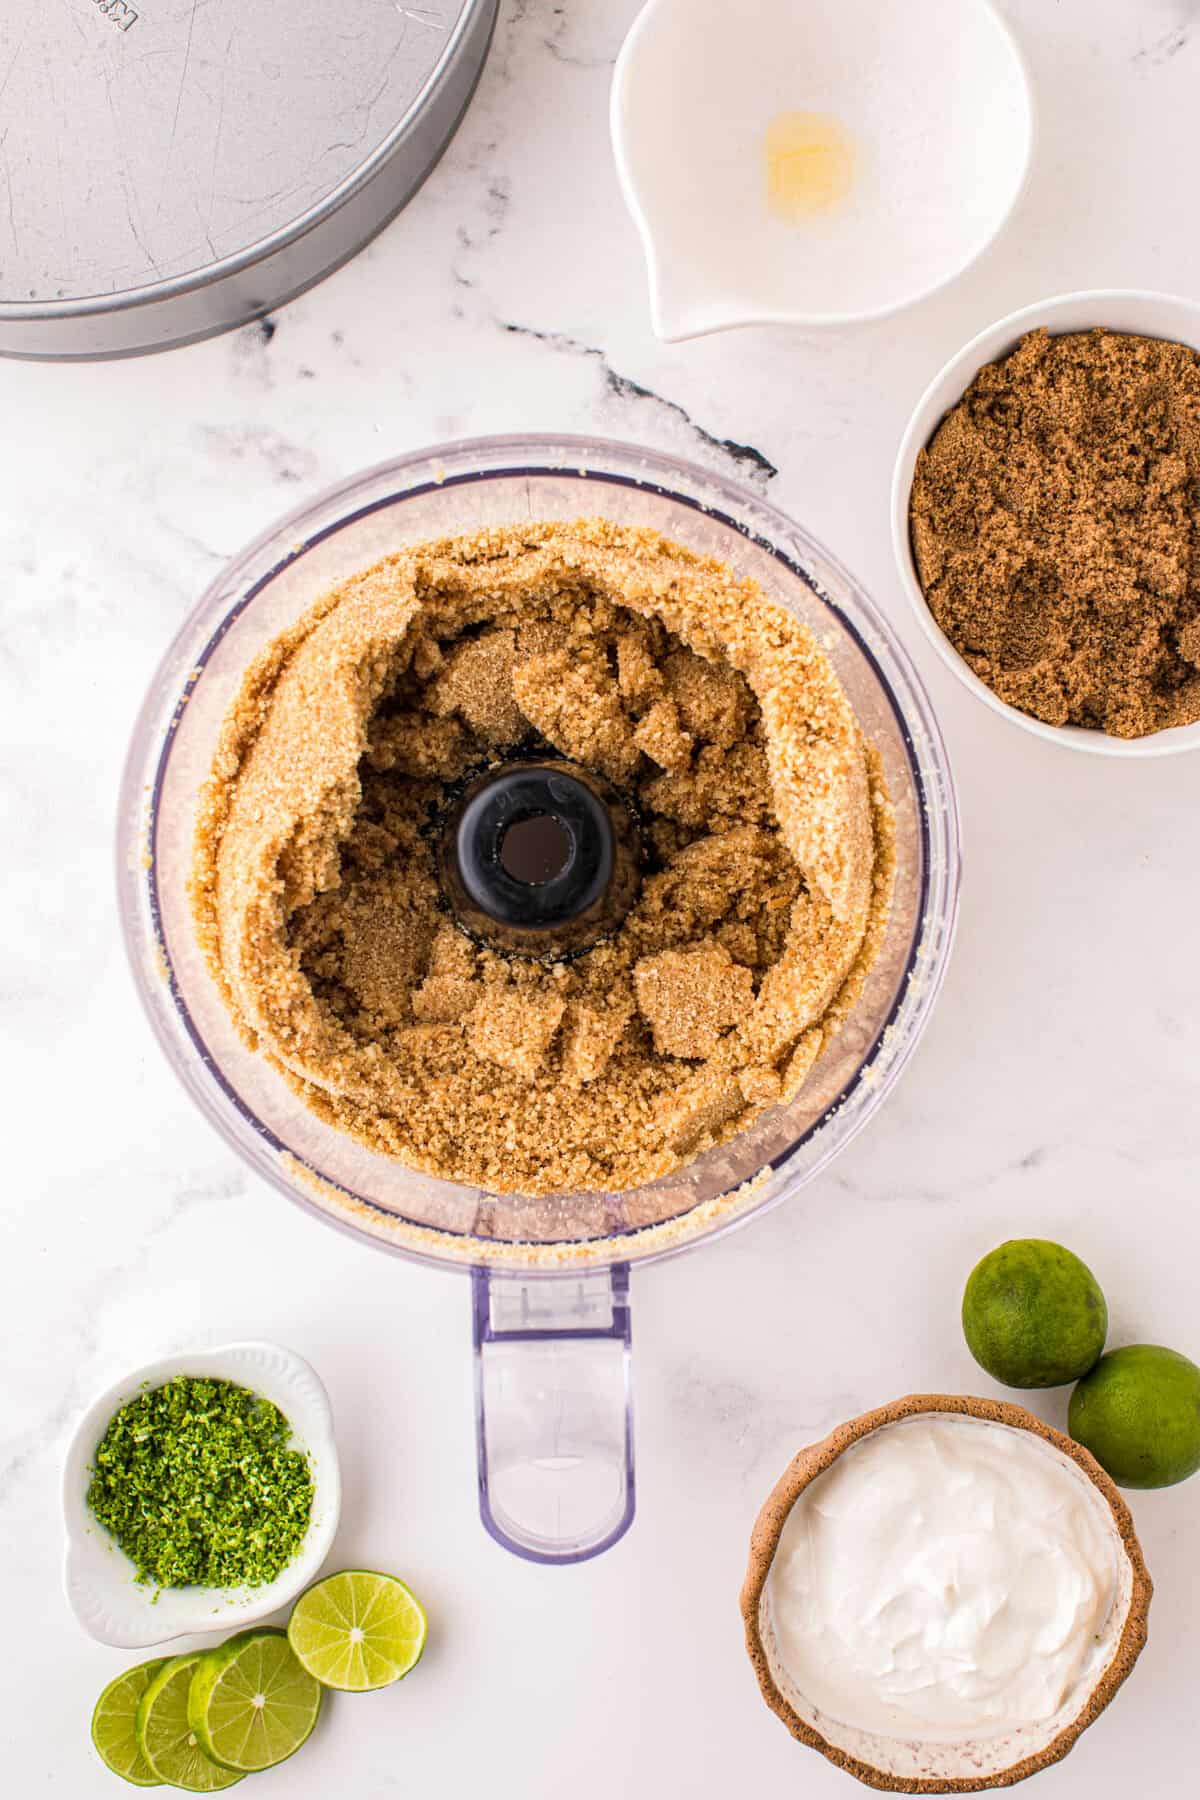 Using Food Processor to Blend Crust for Key Lime Pie Cheesecake